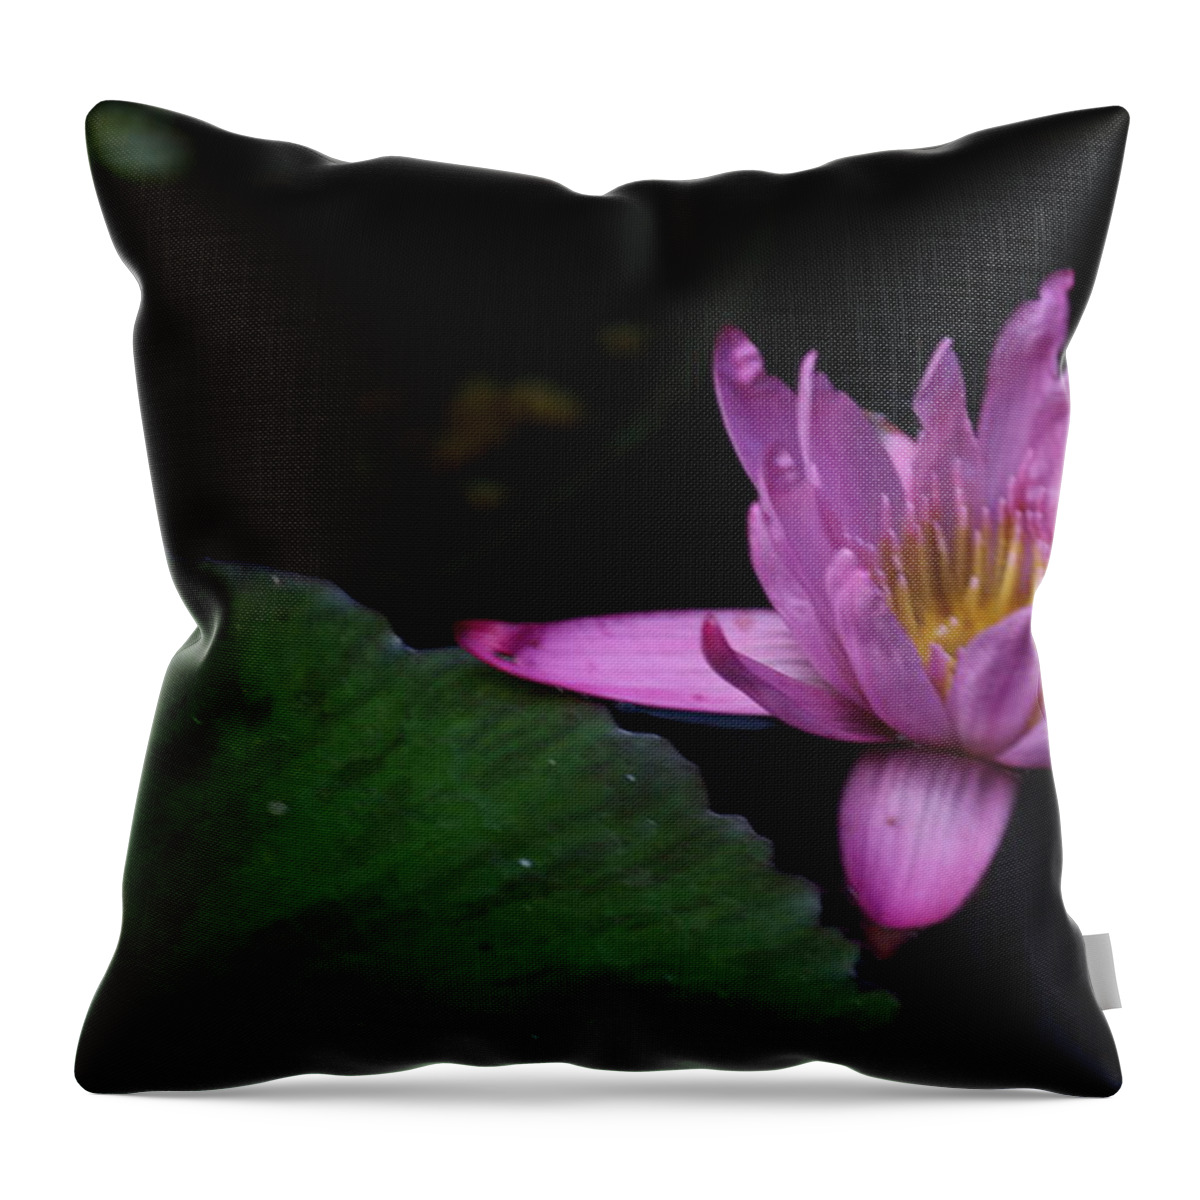 Purple Throw Pillow featuring the photograph Lavendar Water Lily by Donna Walsh